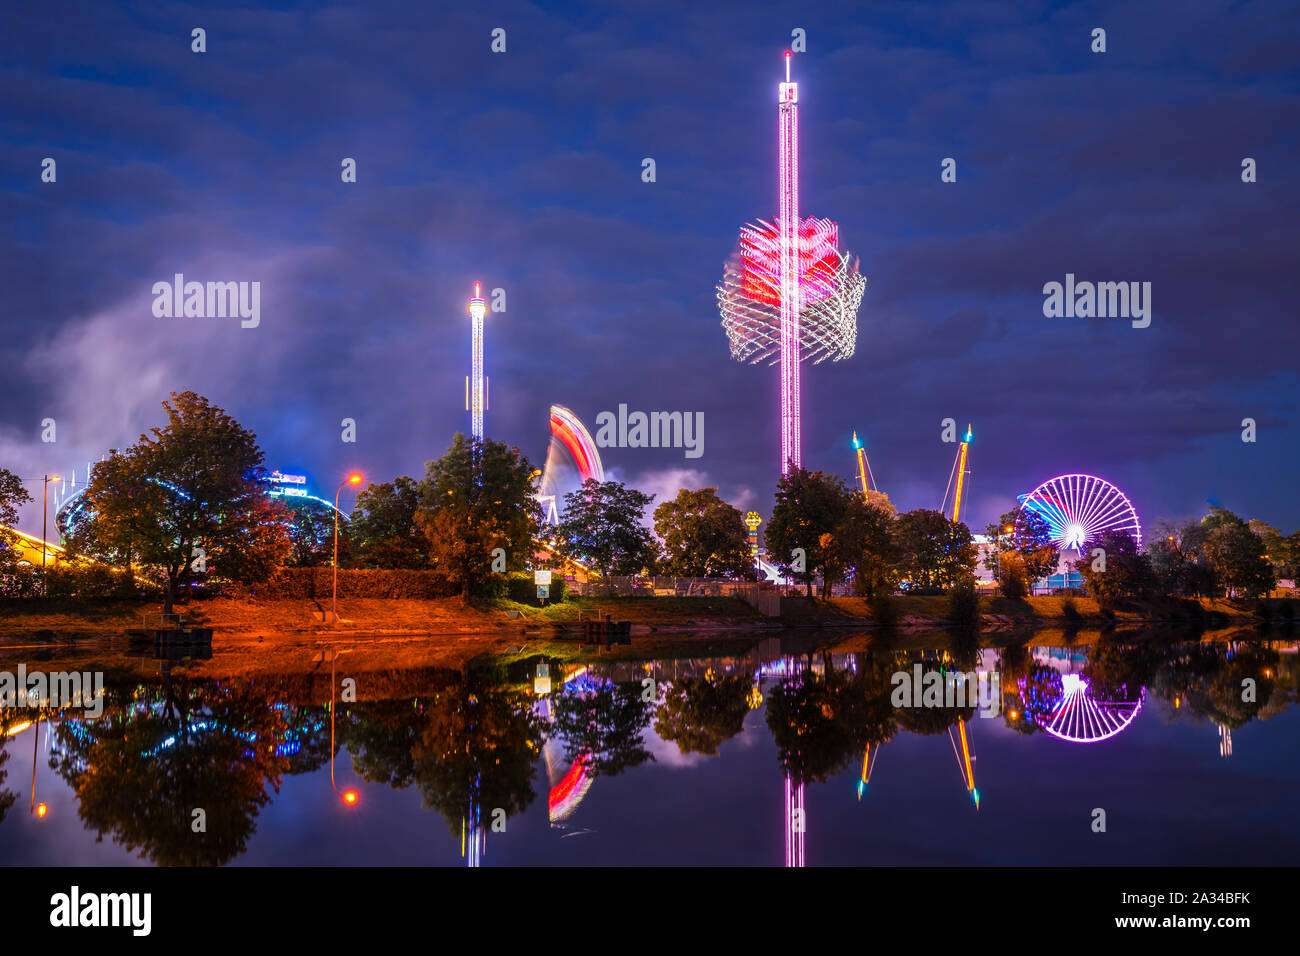 Germany, Colorful illuminated big wheel and rollercoaster of giant swabian fair called cannstatter wasen in stuttgart bad canstatt reflecting in water Stock Photo